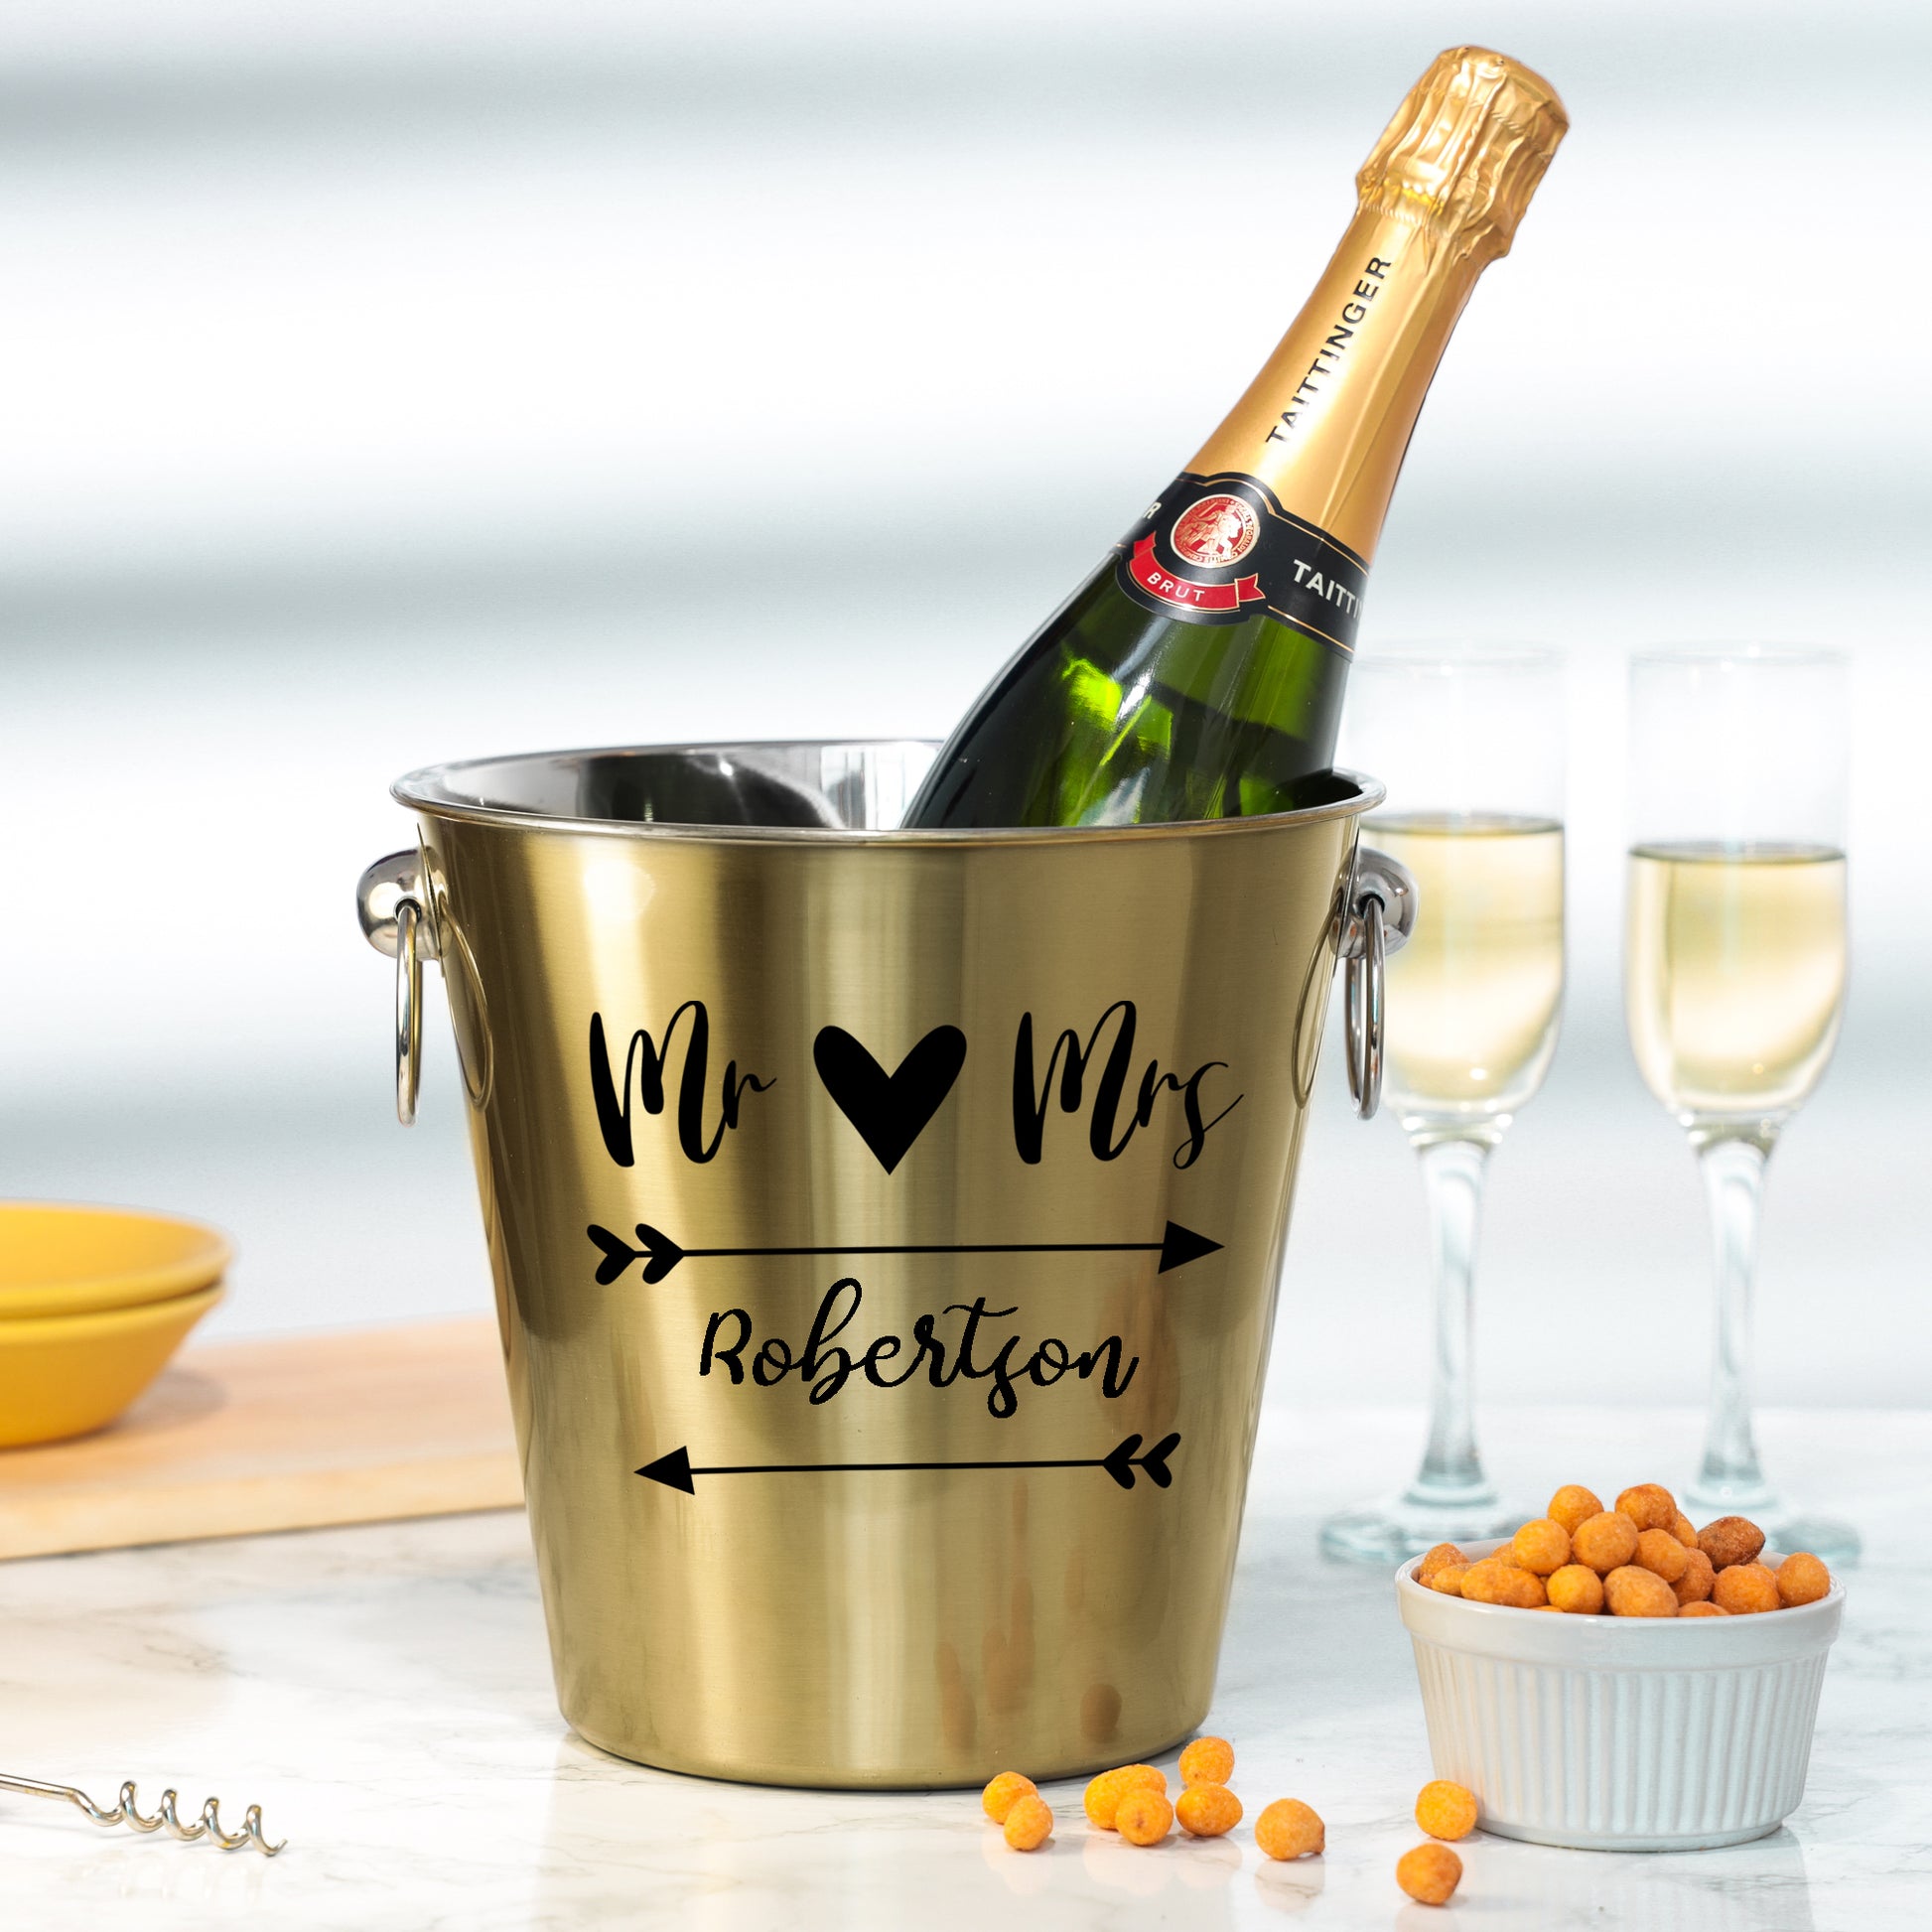 Personalised Wedding Gold Ice Bucket With matching Champagne Glasses  - Always Looking Good -   